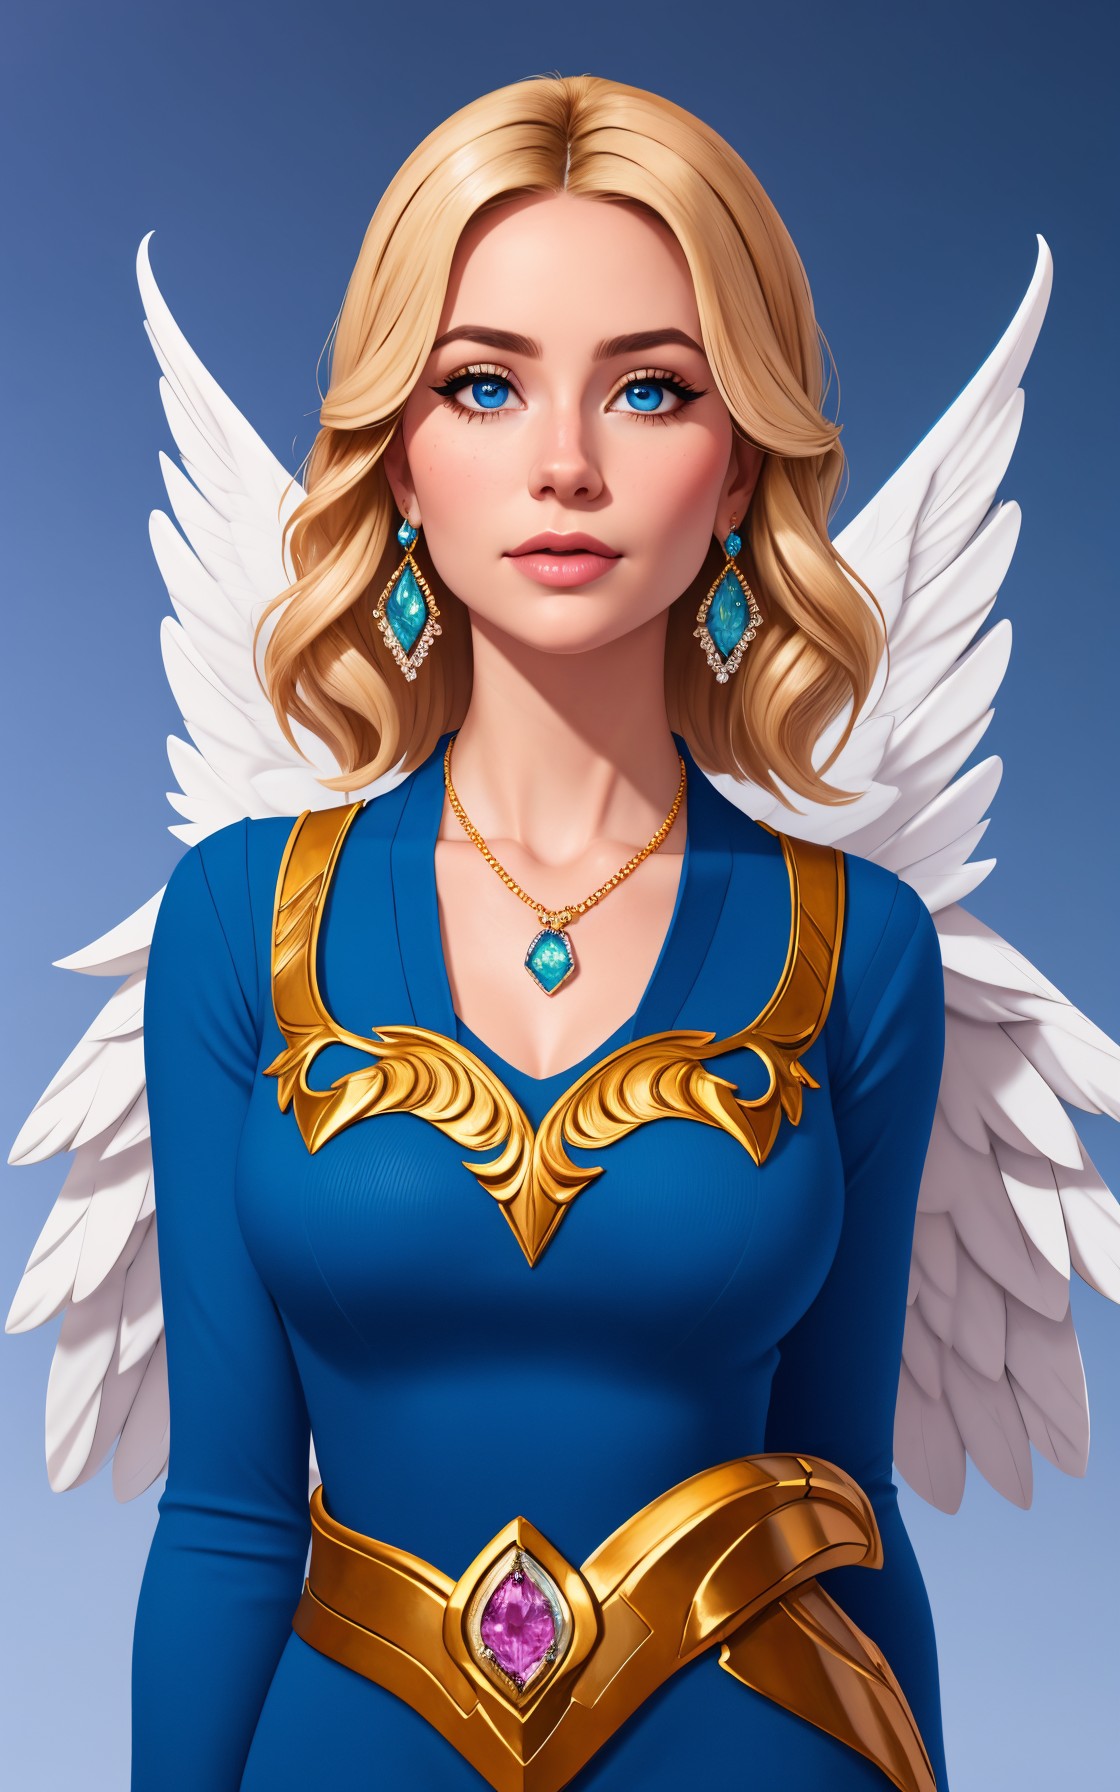 a very pretty woman standing, in a blue sweater and wings on her back, modest, with a blue dress and necklace, Artgerm, so...